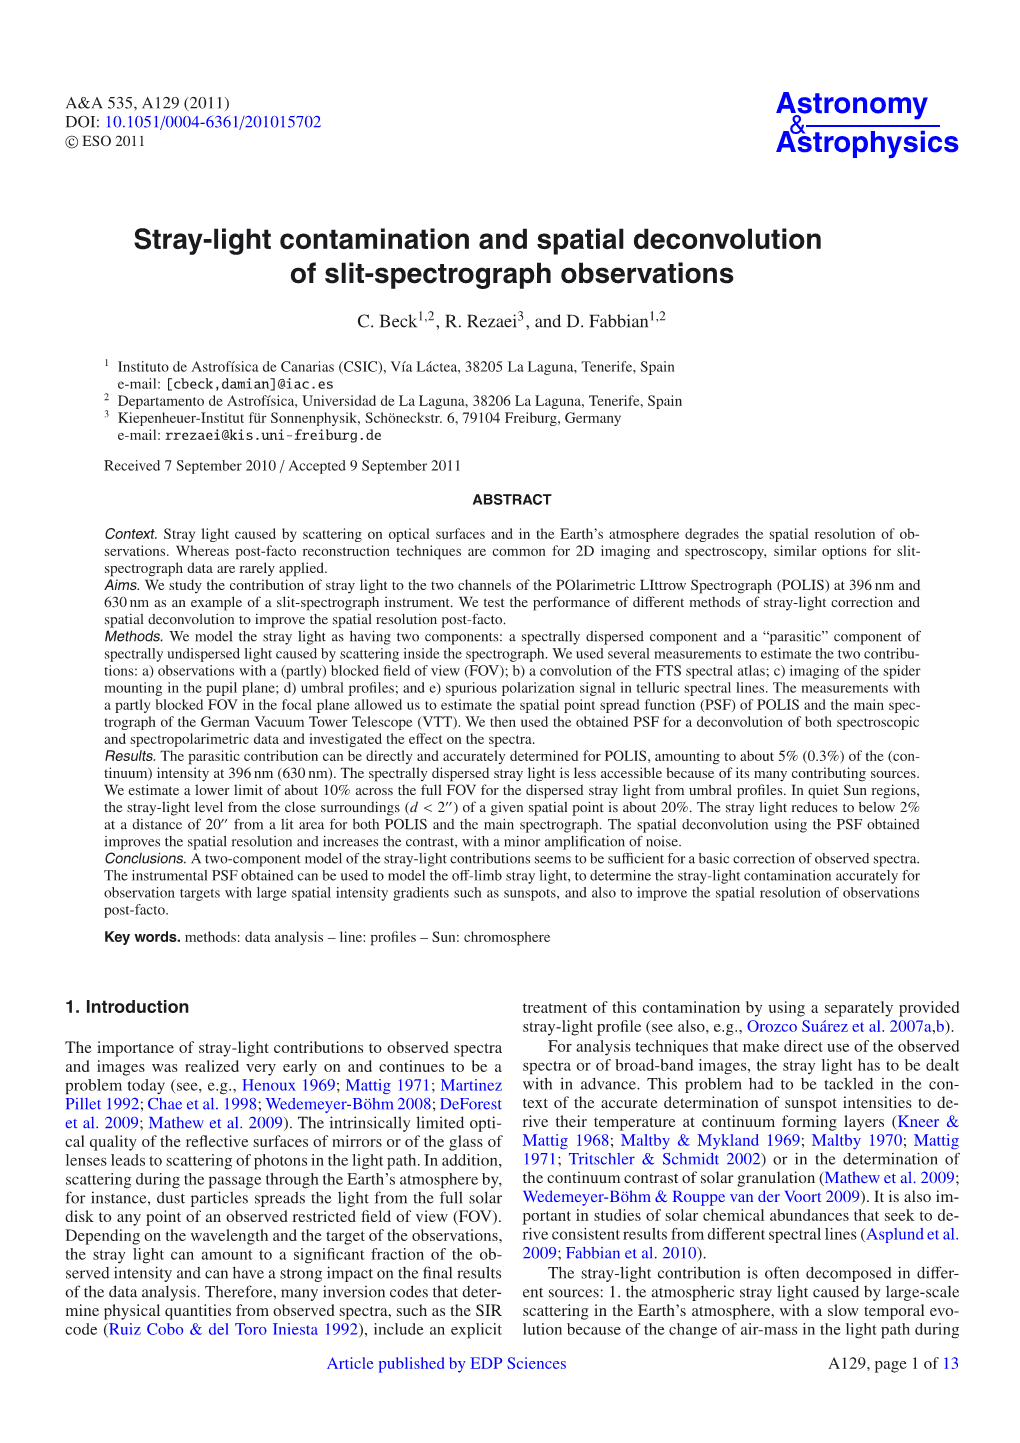 Stray-Light Contamination and Spatial Deconvolution of Slit-Spectrograph Observations